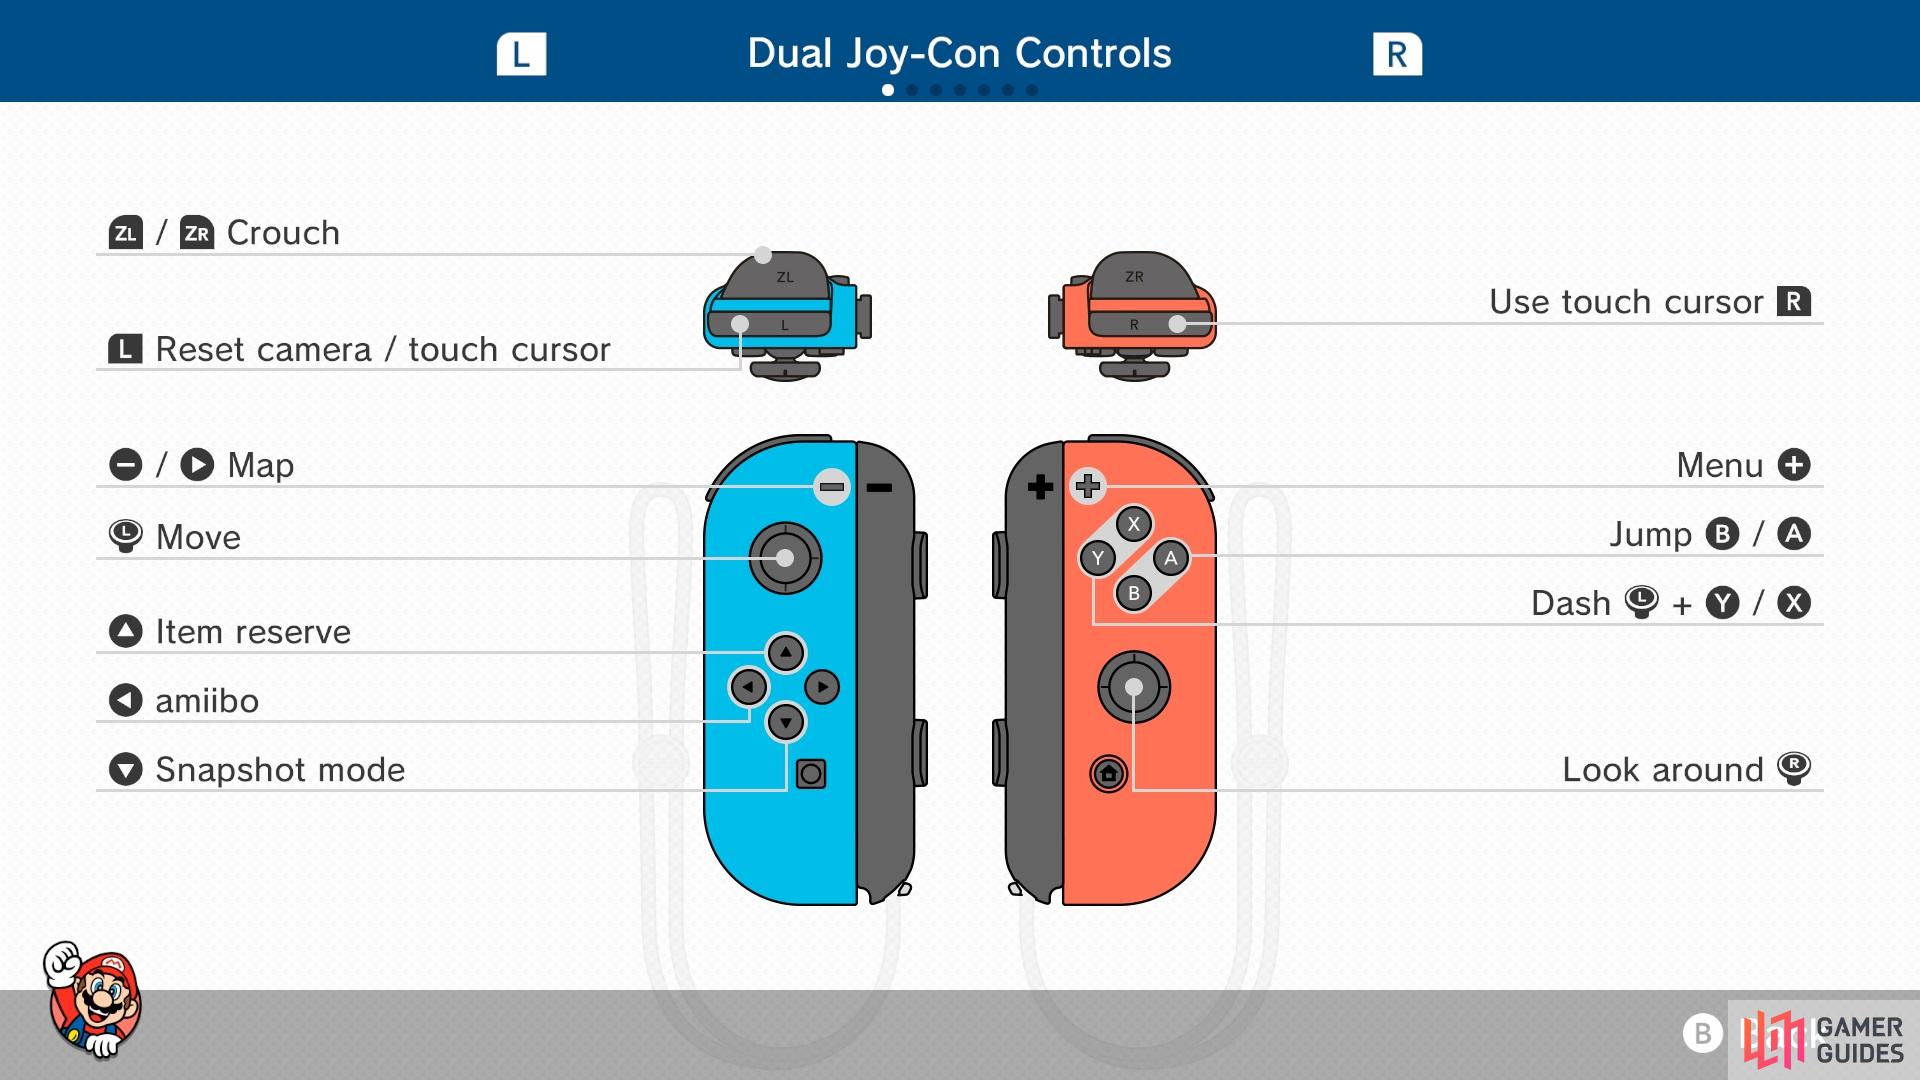 Controls for Bowser’s Fury